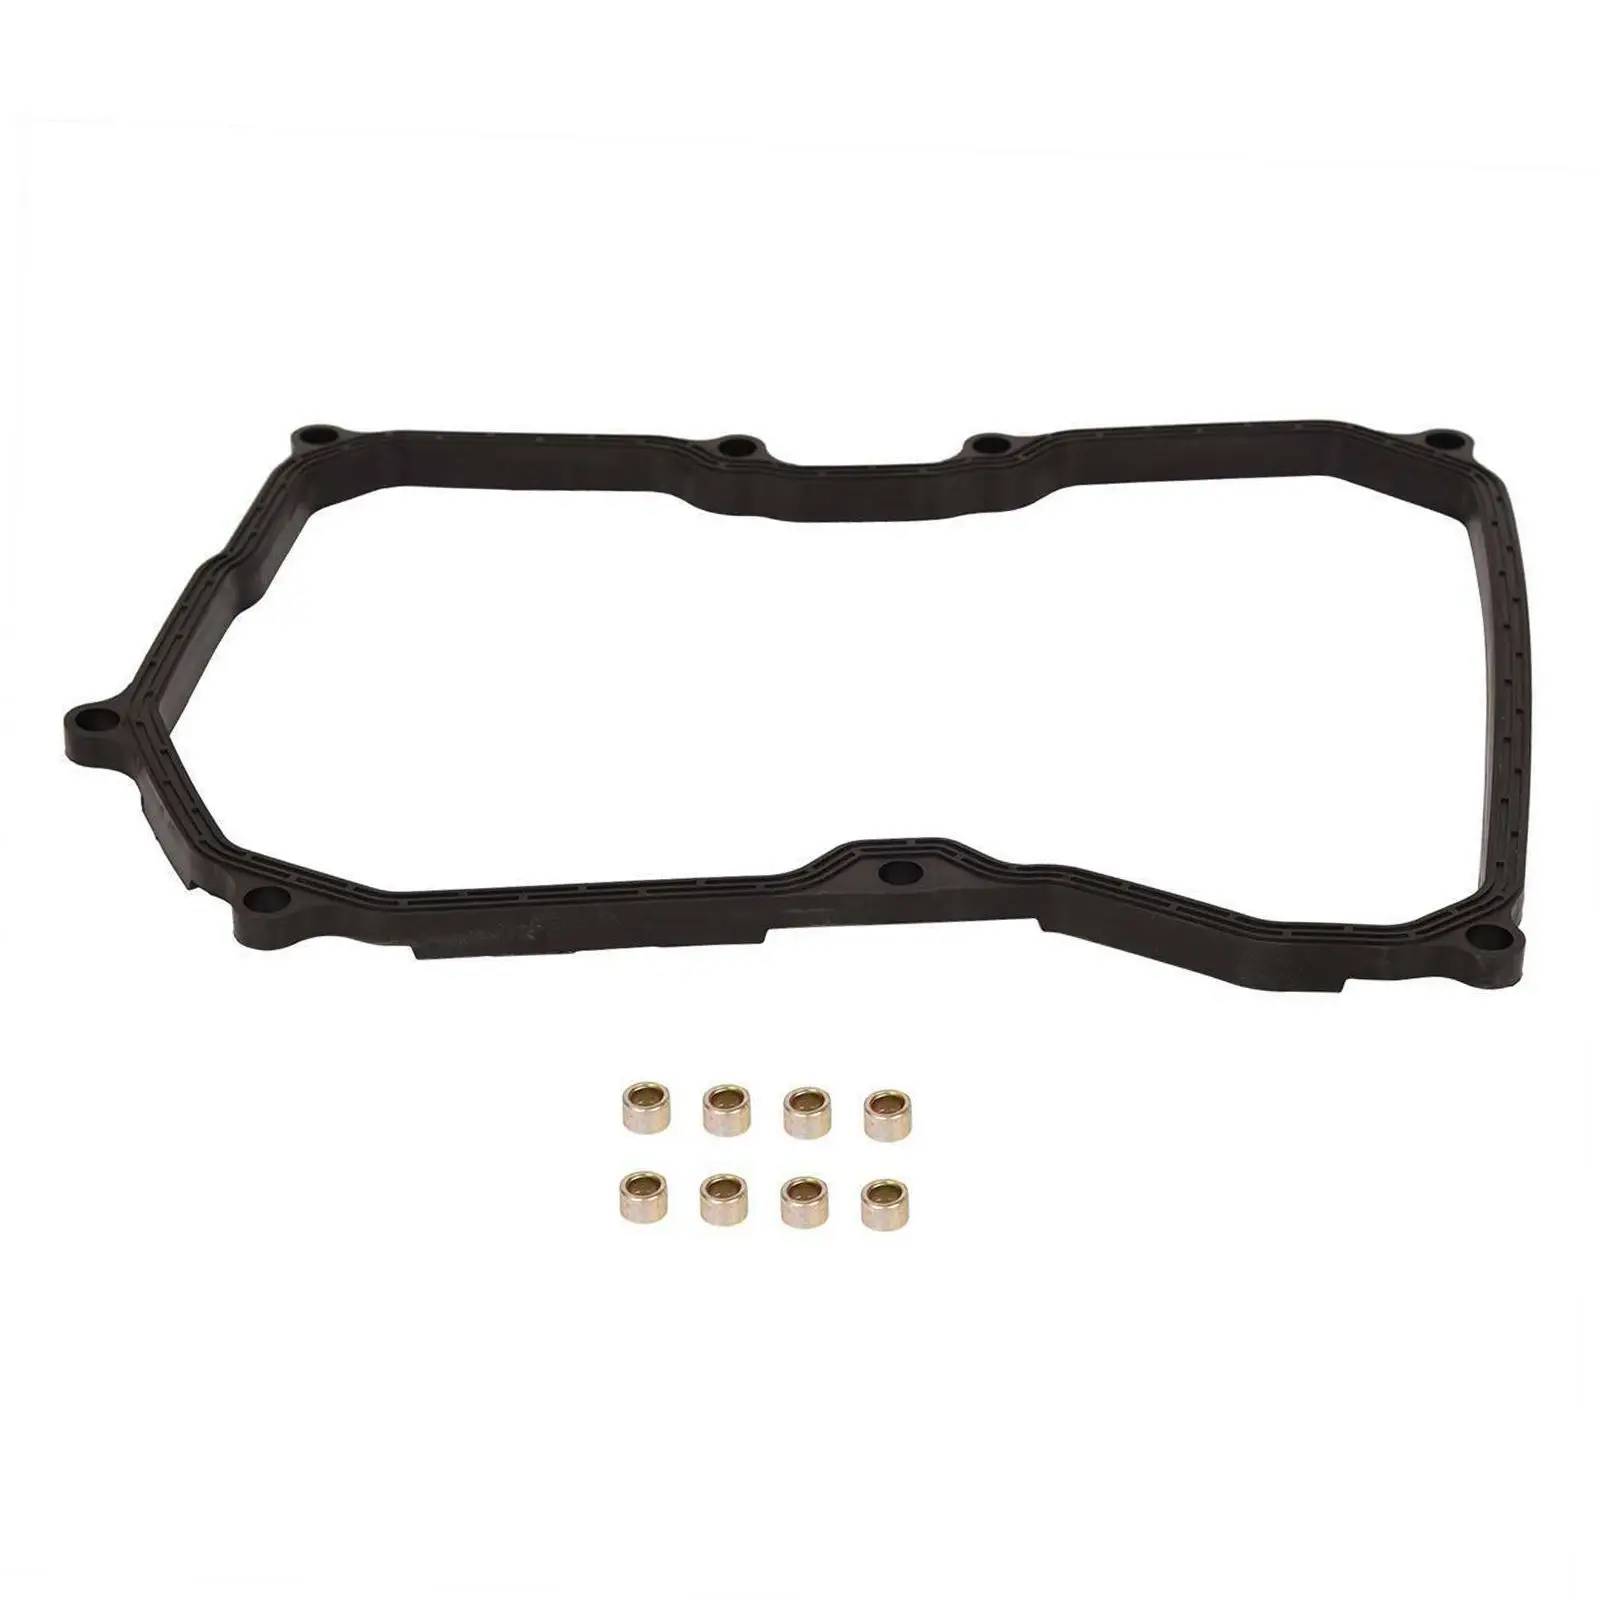 Transmission Oil Pan Gasket Lightweight for Mini 2007+ Replace Parts